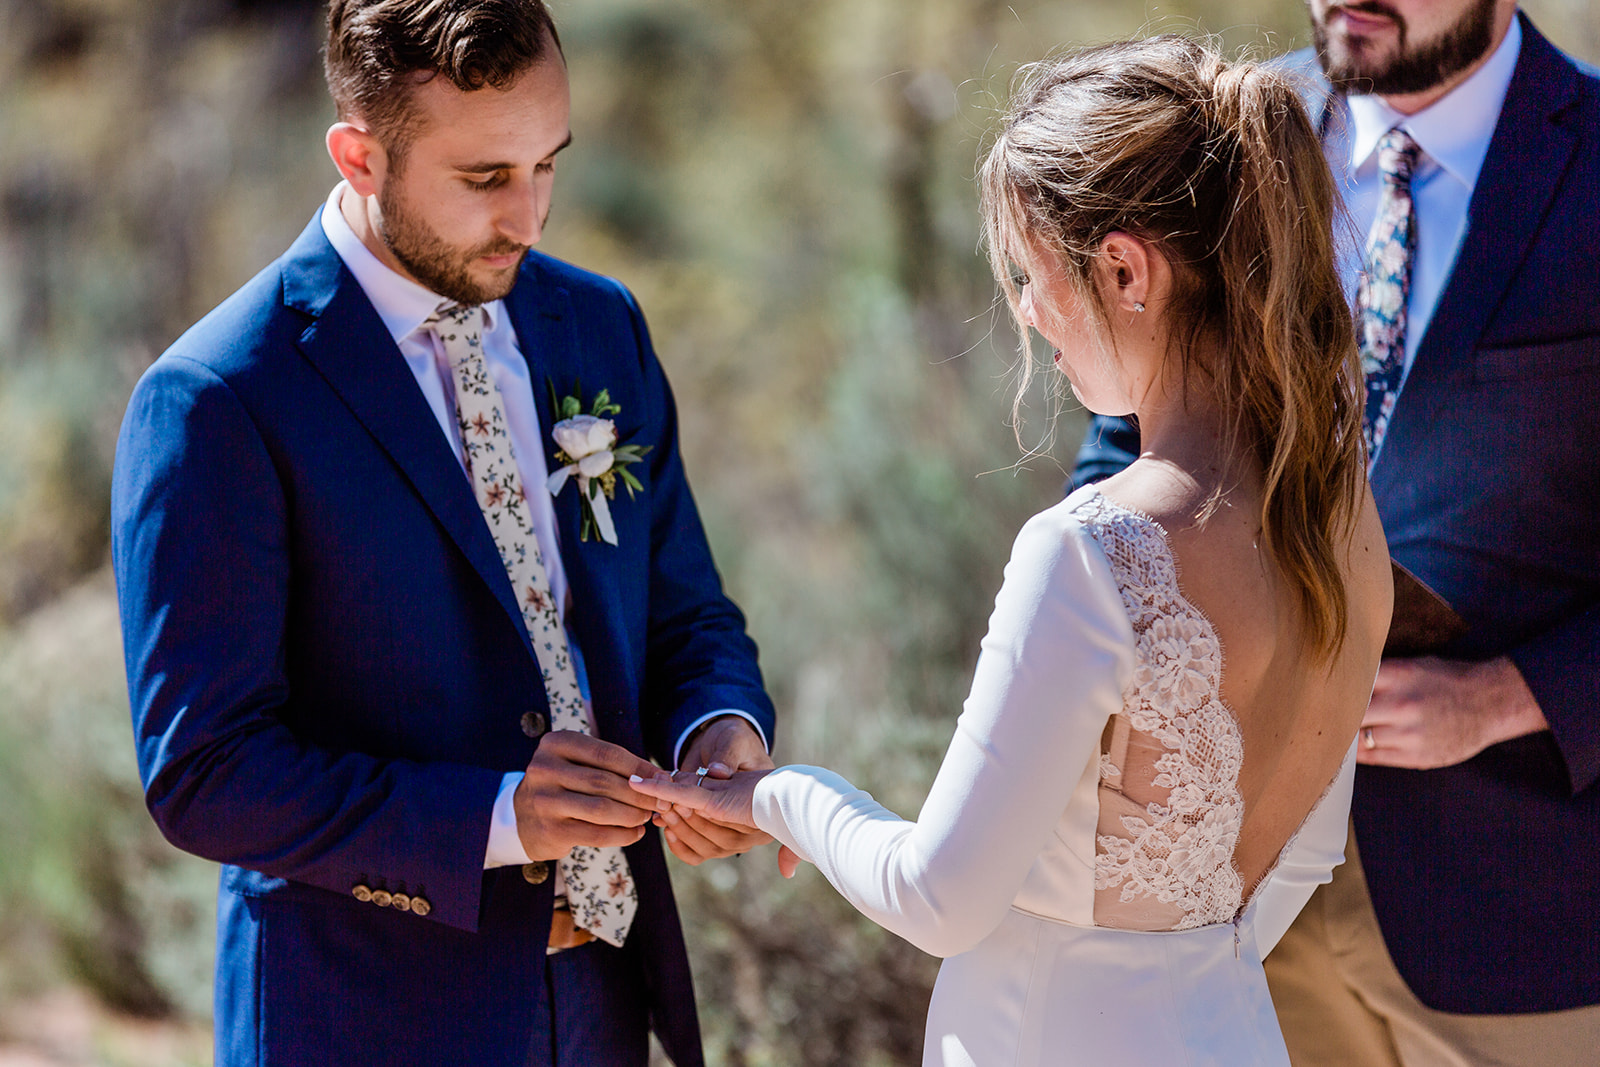 groom puts ring on bride's hand